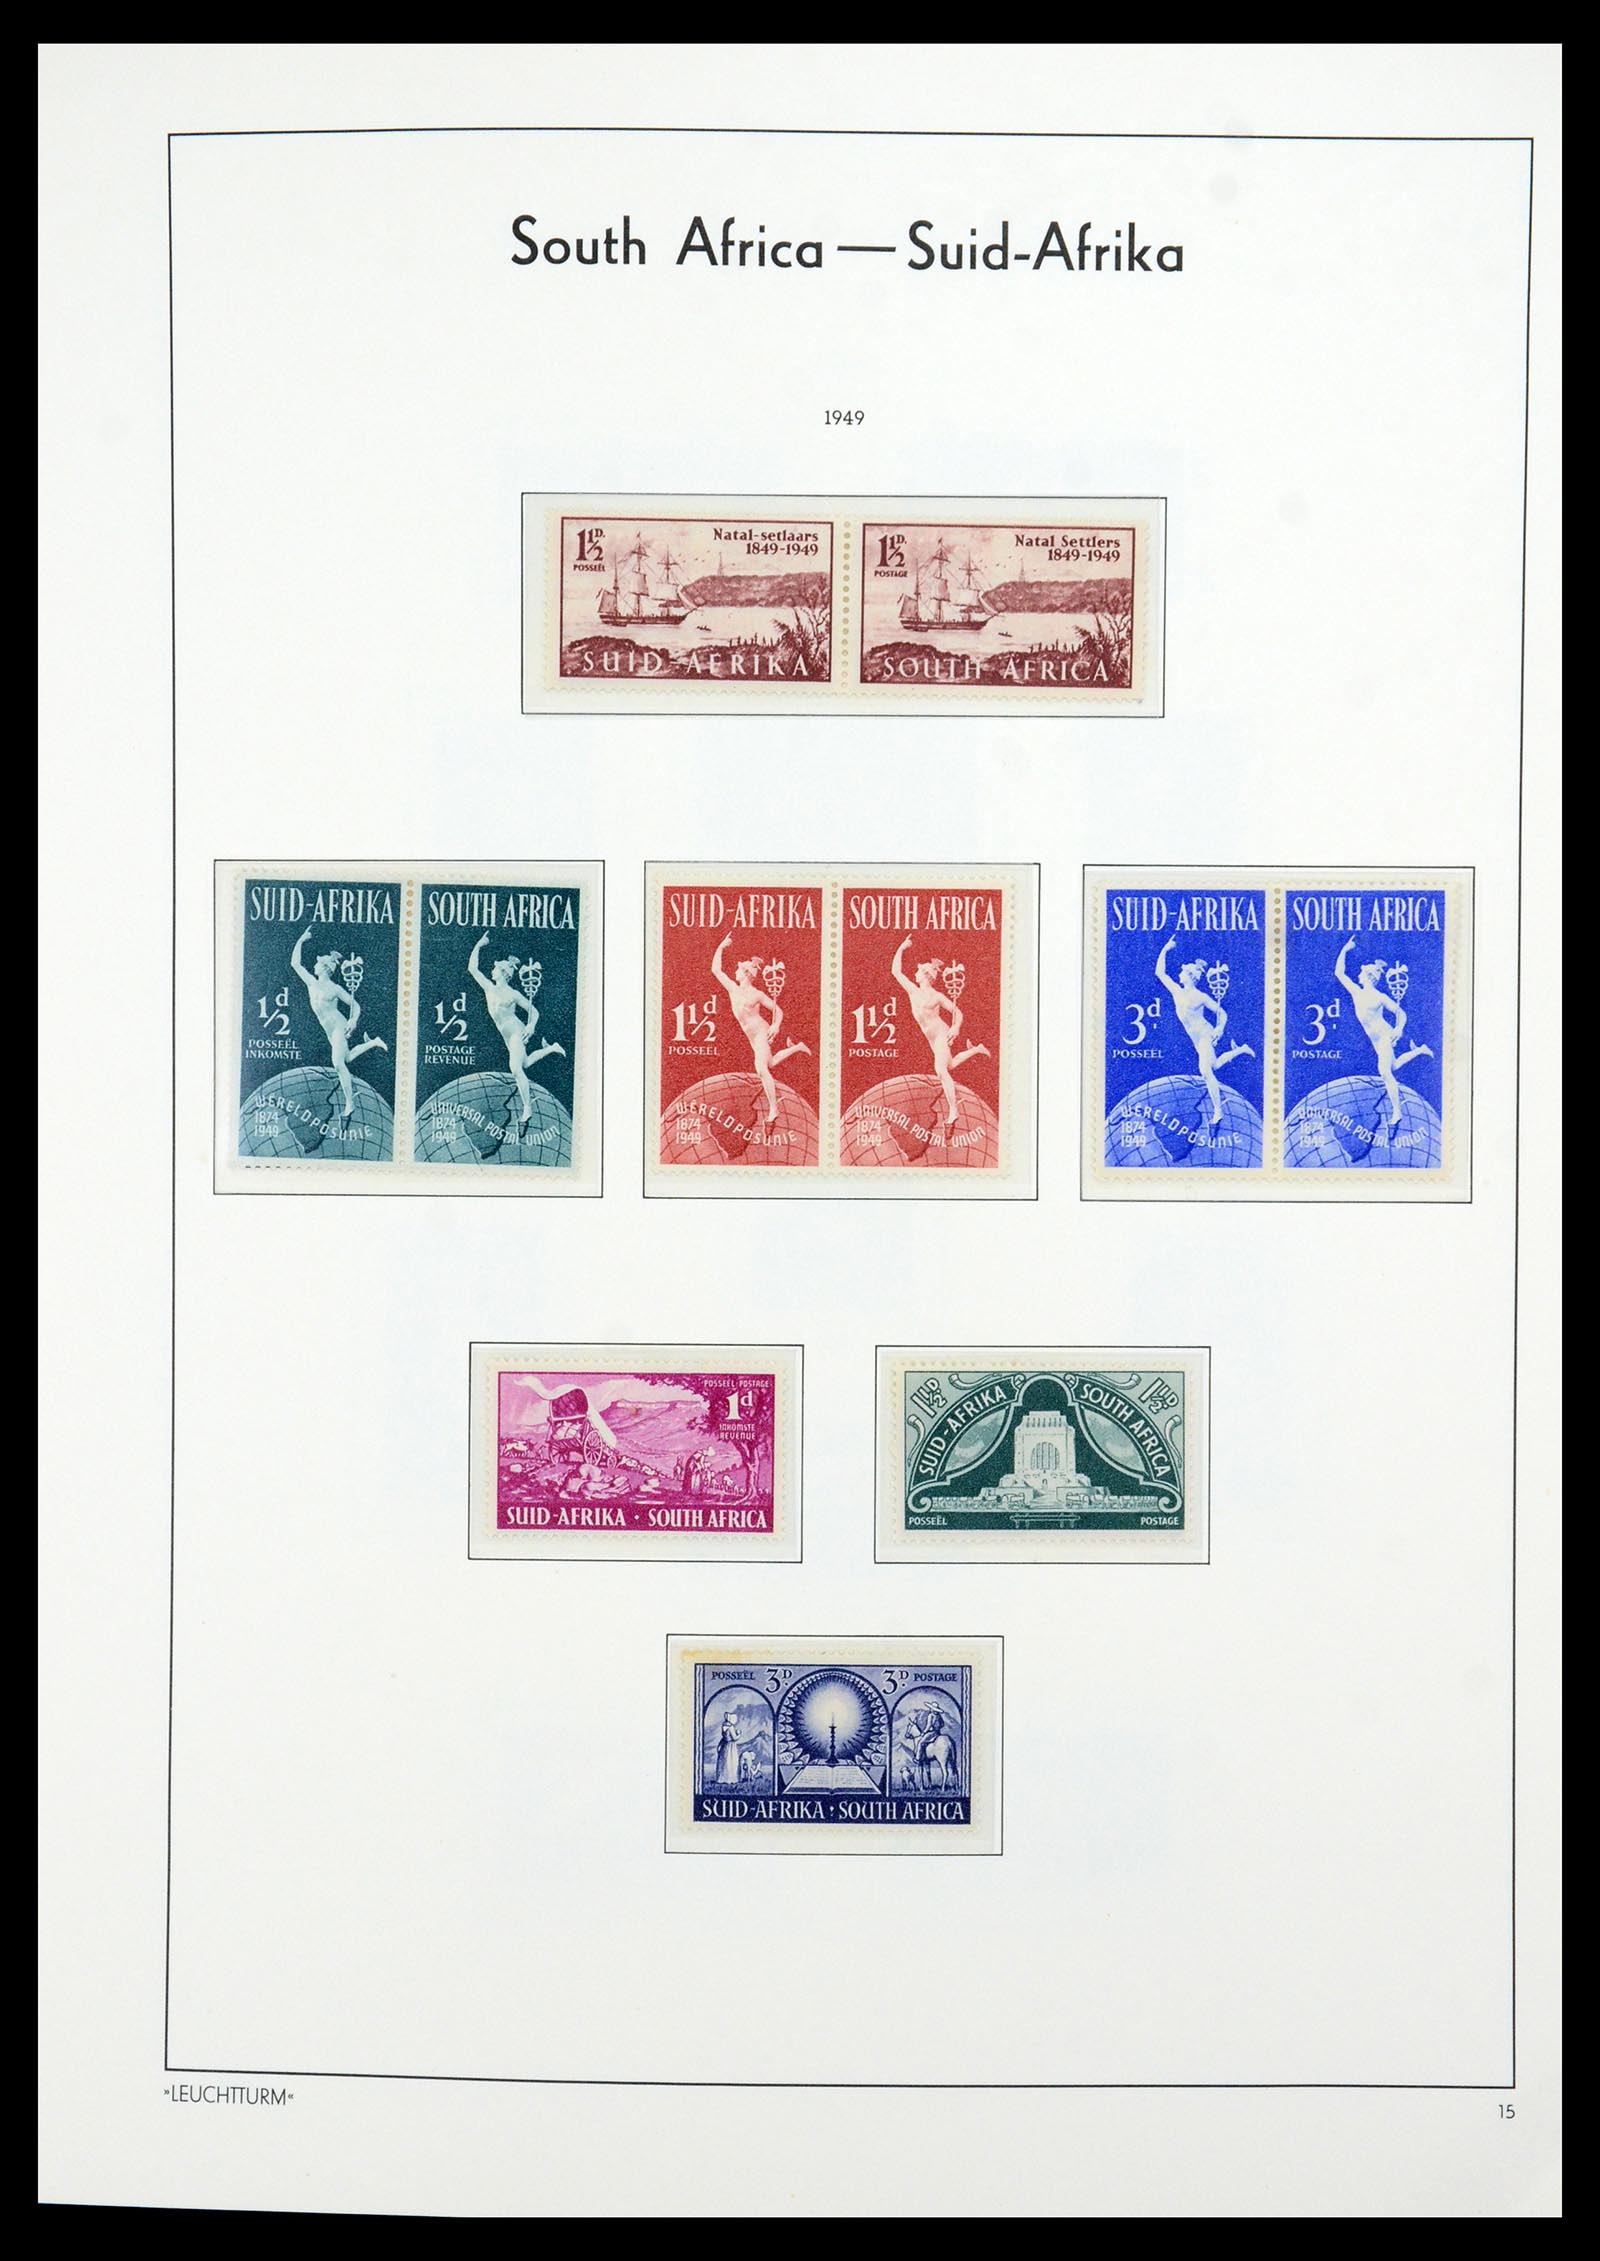 35789 050 - Stamp Collection 35789 South Africa and territories 1855-1999.